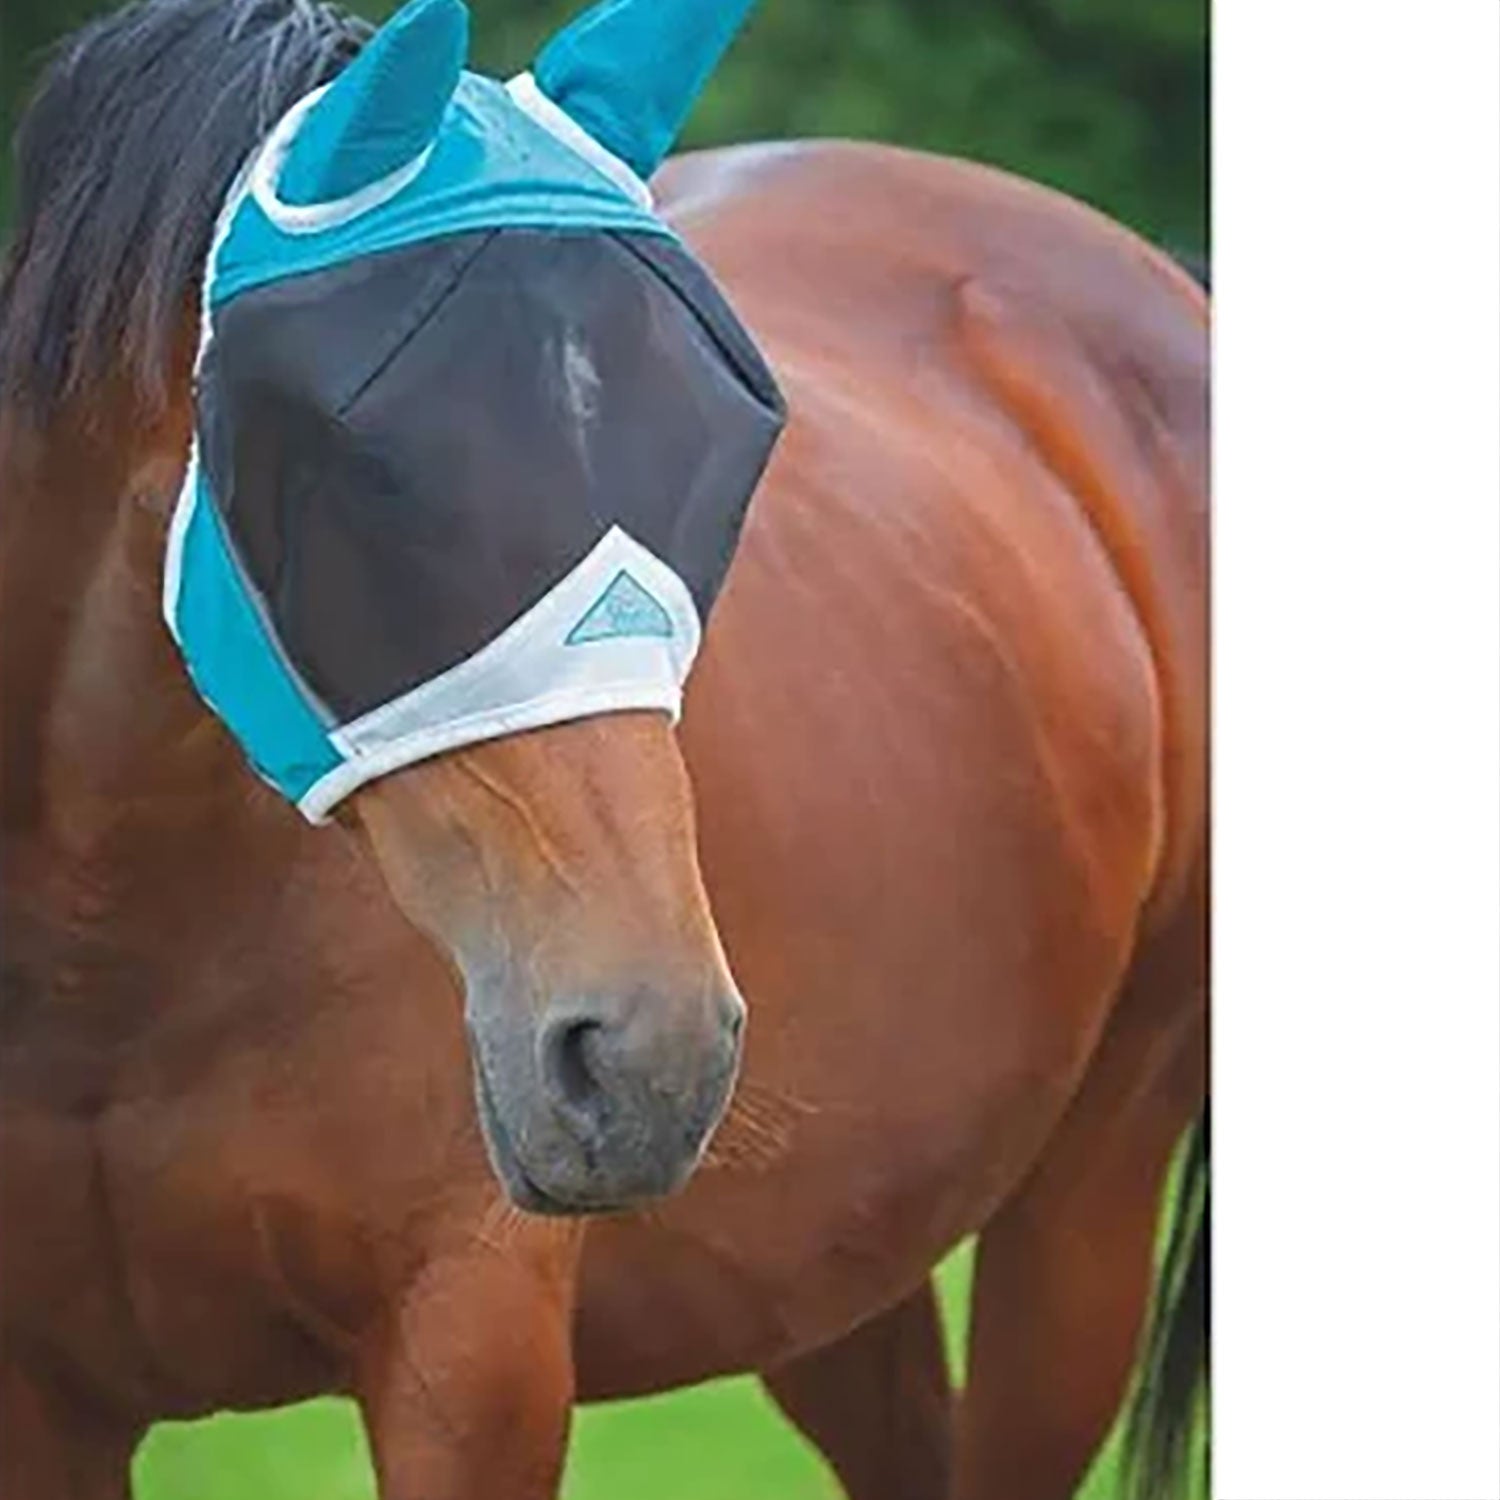 Shires Fly Guard Fine Mesh Fly Mask with Ears